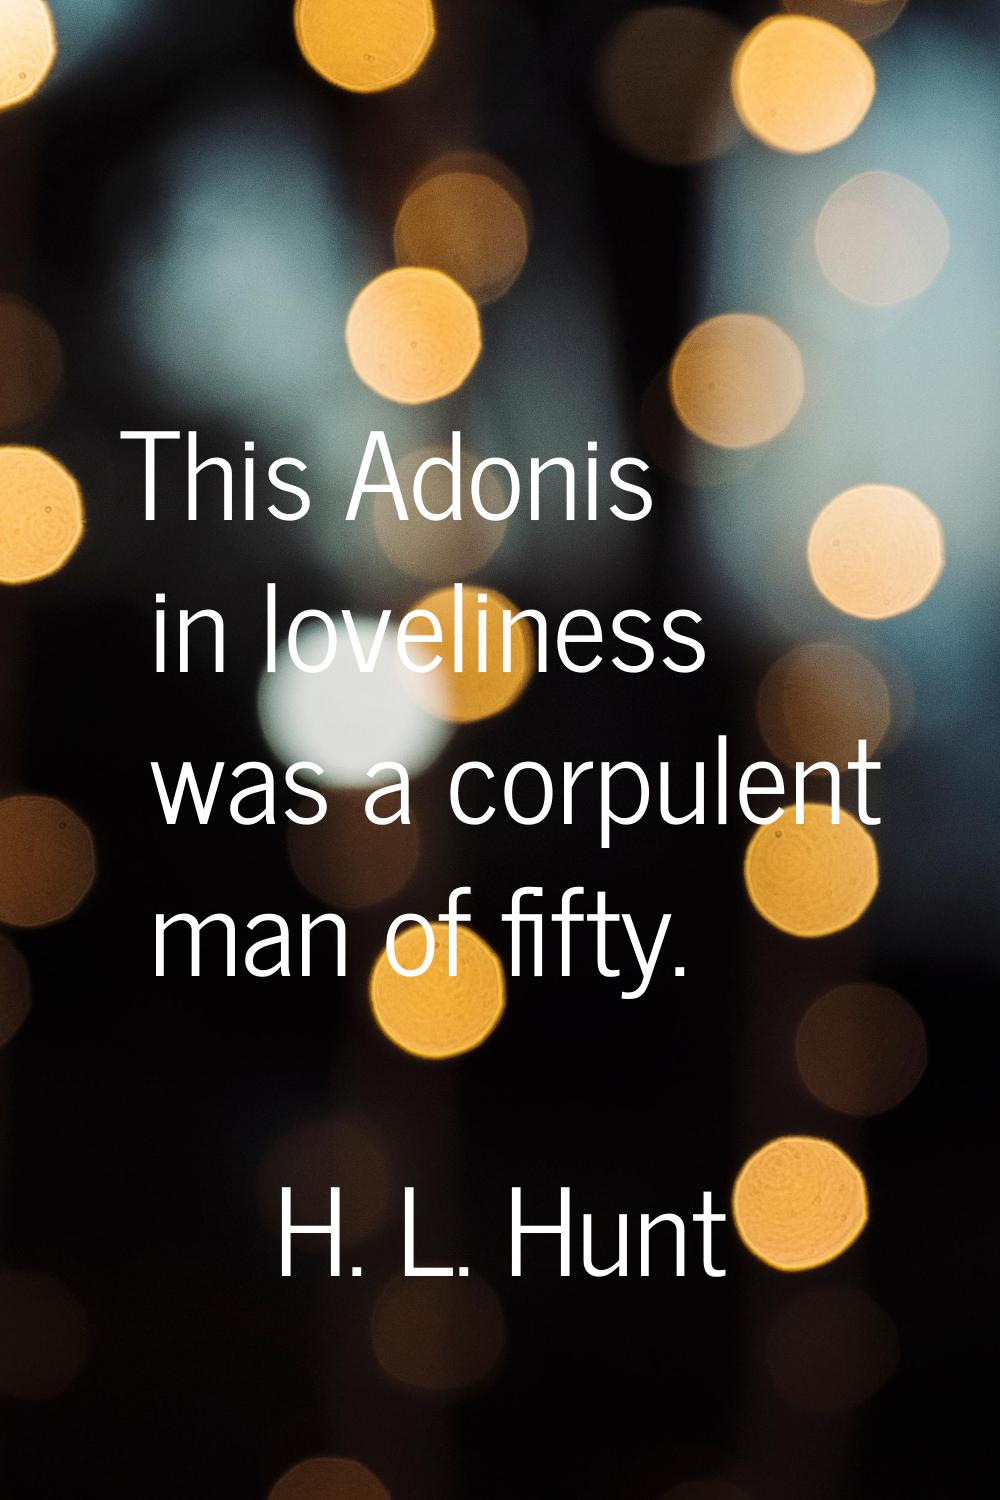 This Adonis in loveliness was a corpulent man of fifty.